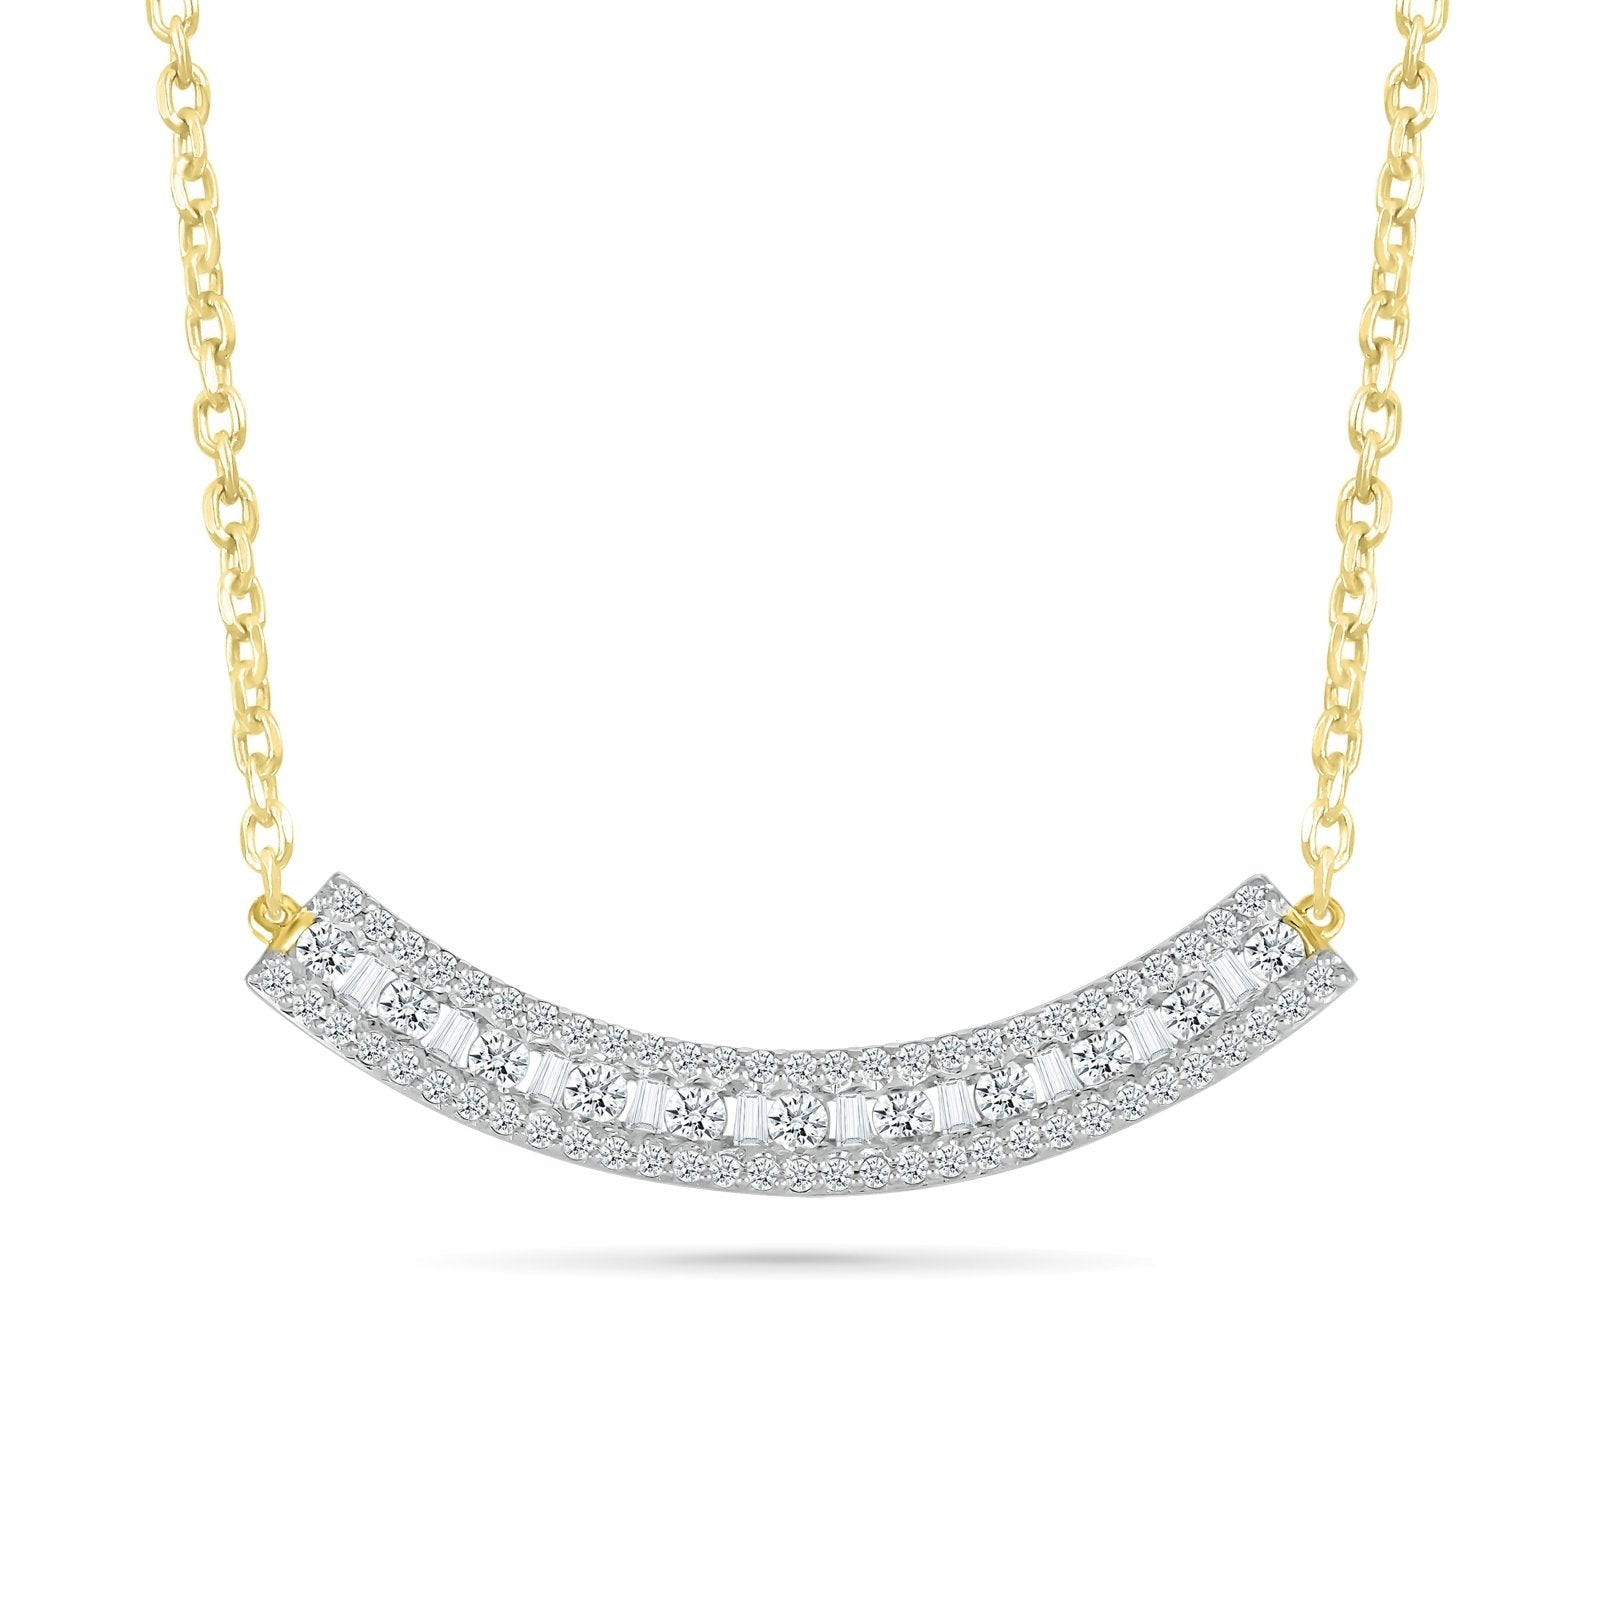 Round and Emerald Cut Diamond Curved Necklace Necklaces Estella Collection #product_description# 32696 Diamond Layering Necklace Made to Order #tag4# #tag5# #tag6# #tag7# #tag8# #tag9# #tag10#